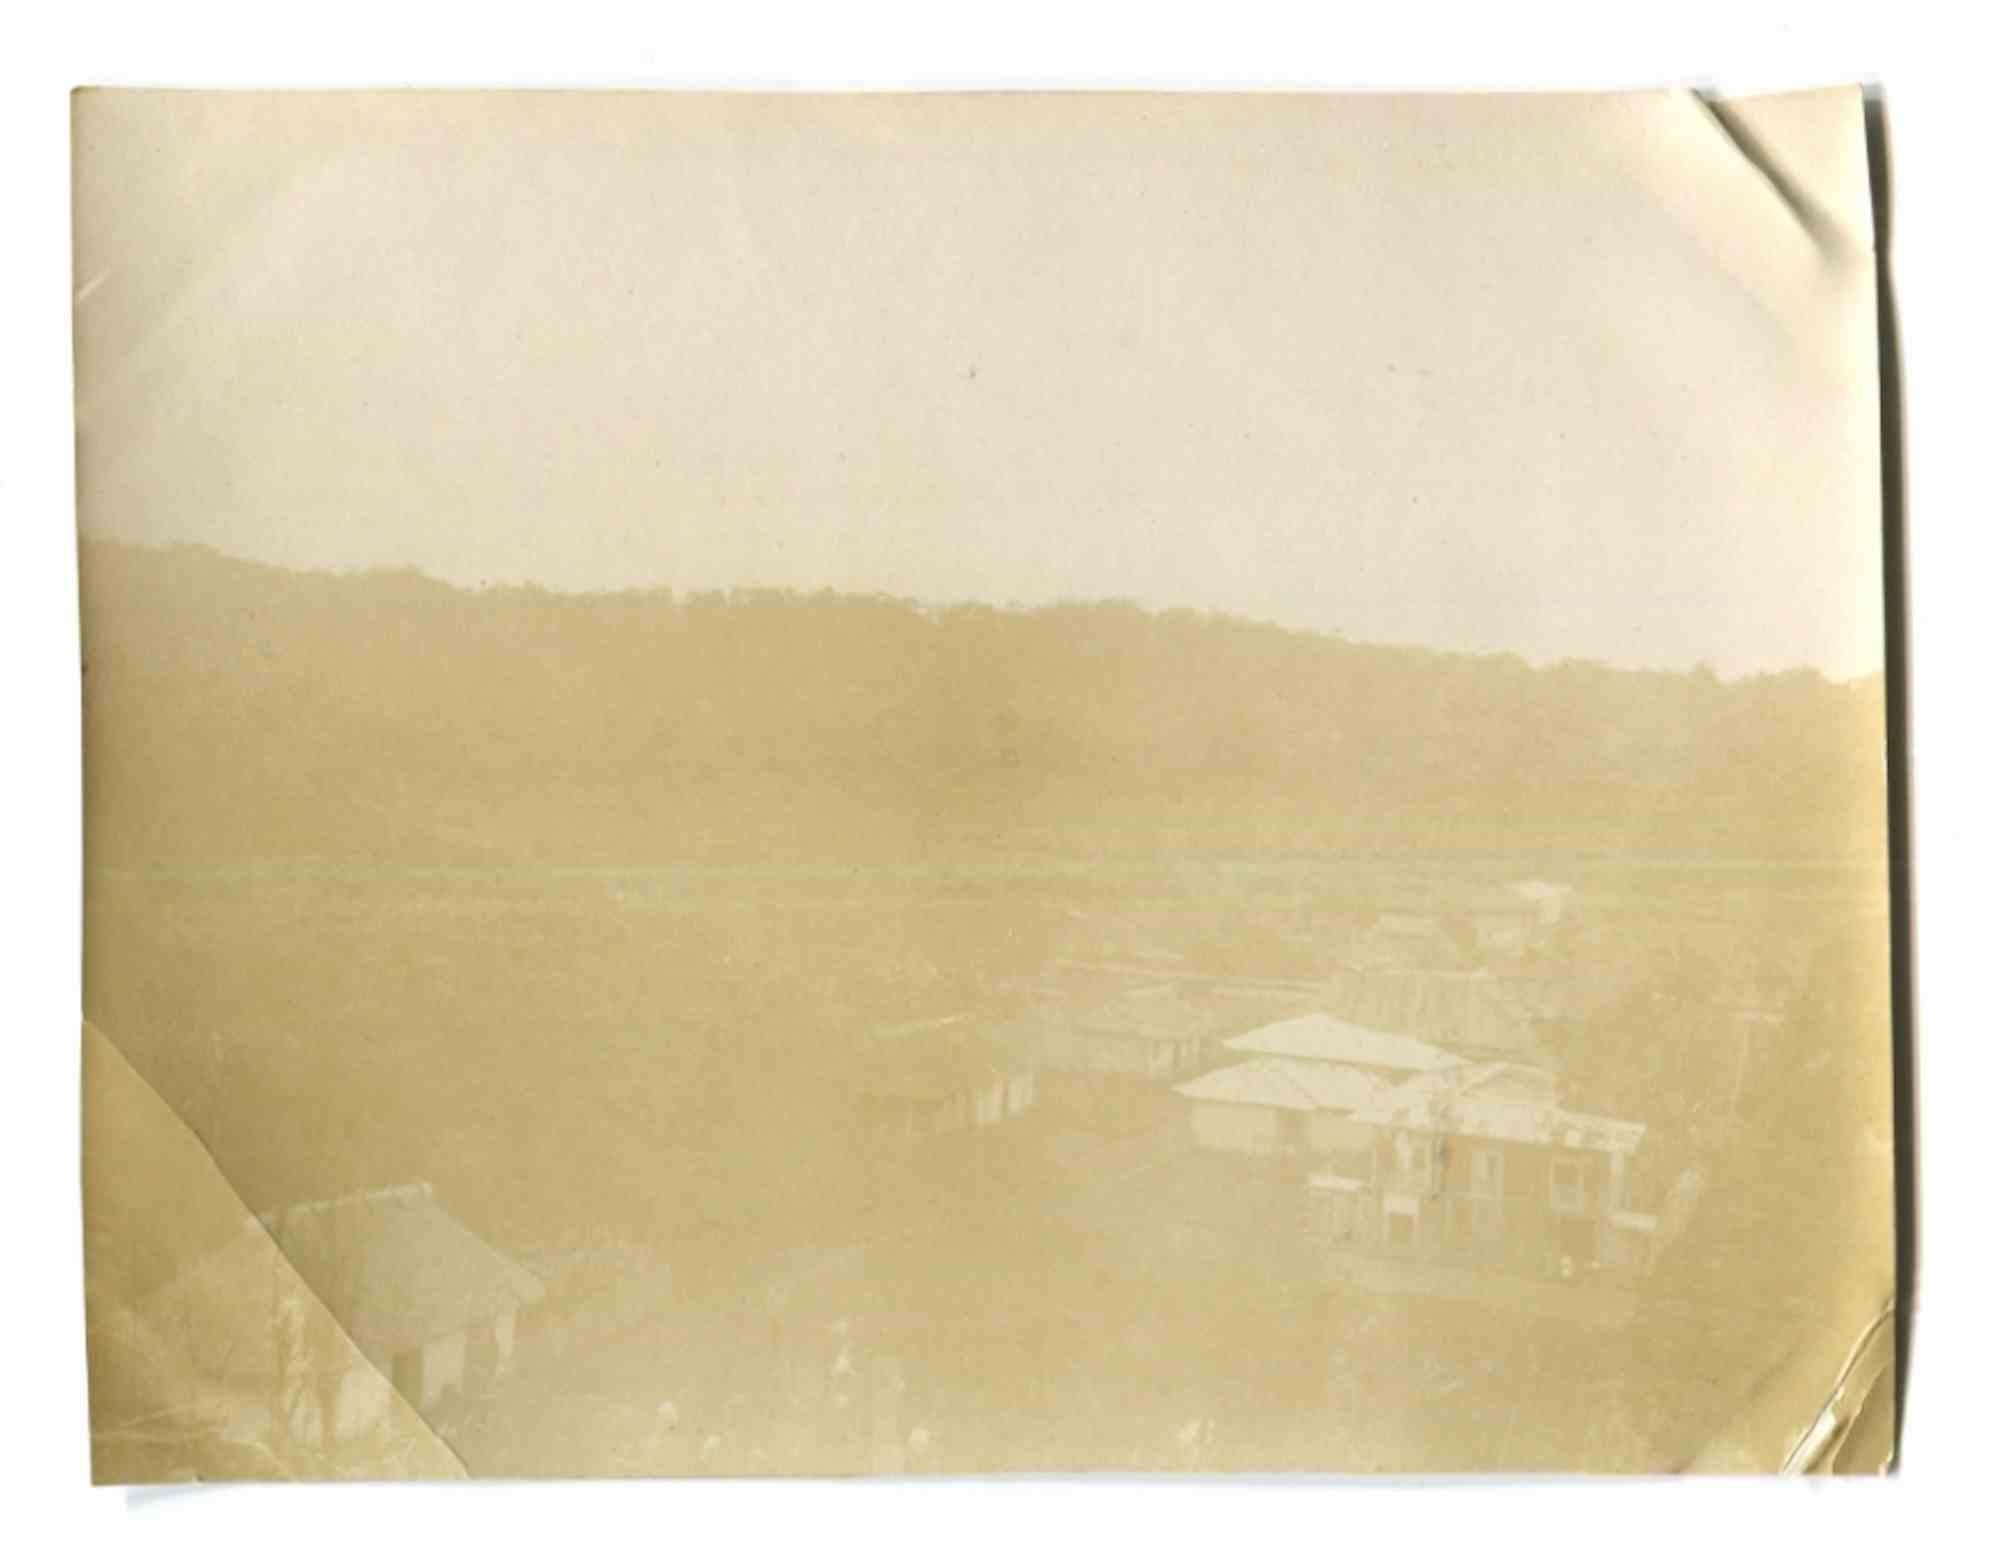 Unknown Figurative Photograph - Old Days  -  Vintage Photo - Landscape - Early 20th Century